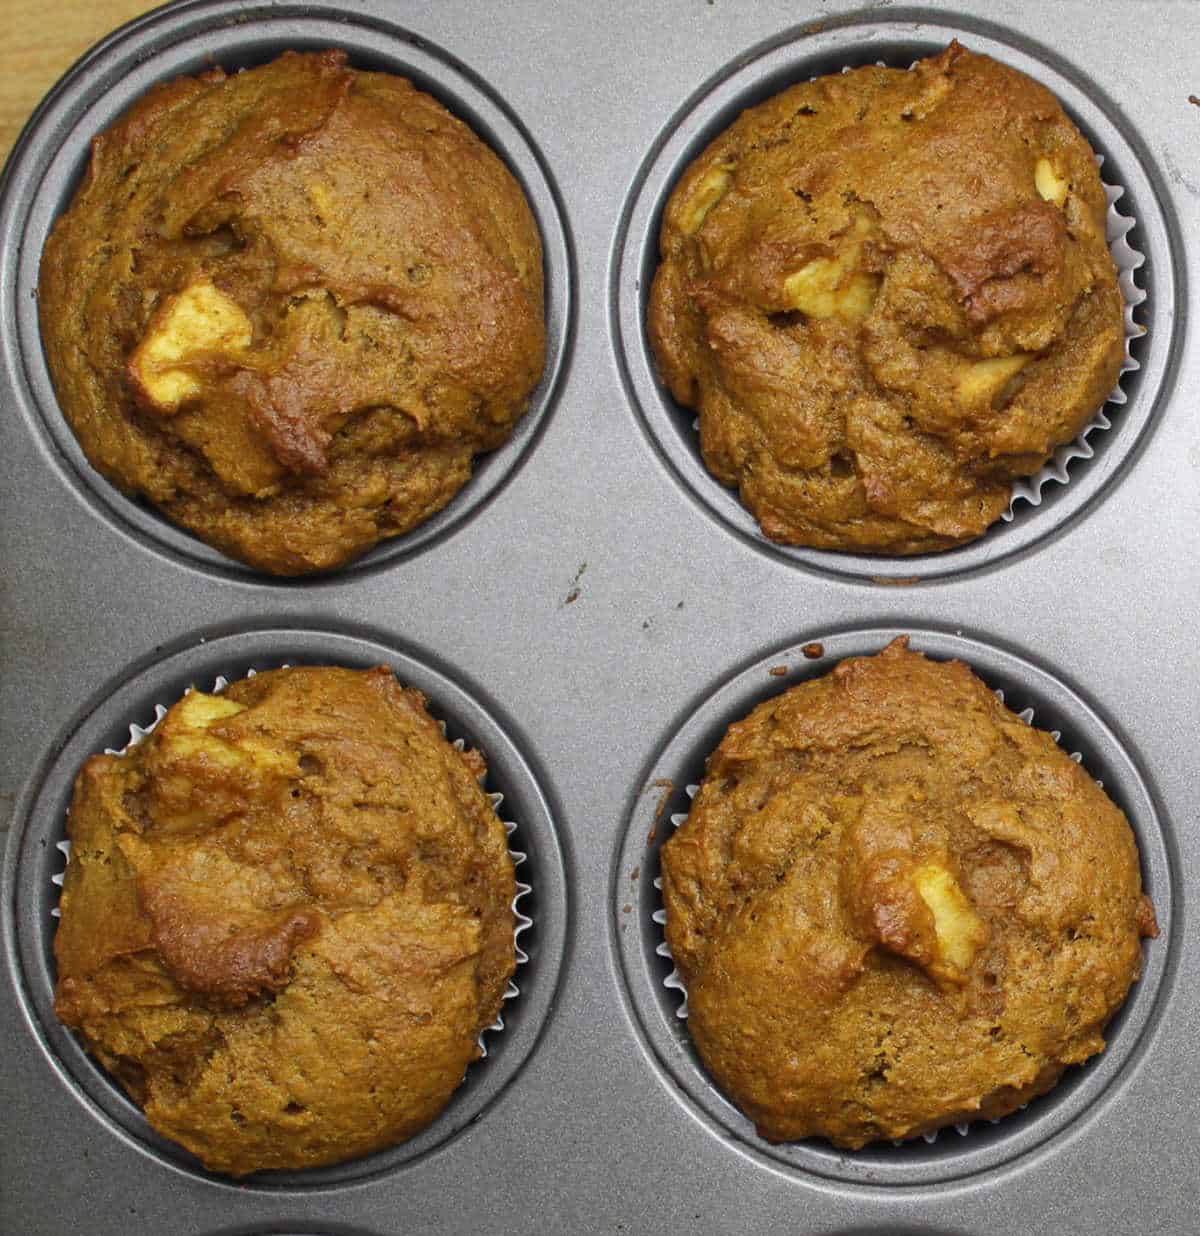 four pumpkin apple muffins with pieces of apple visible.